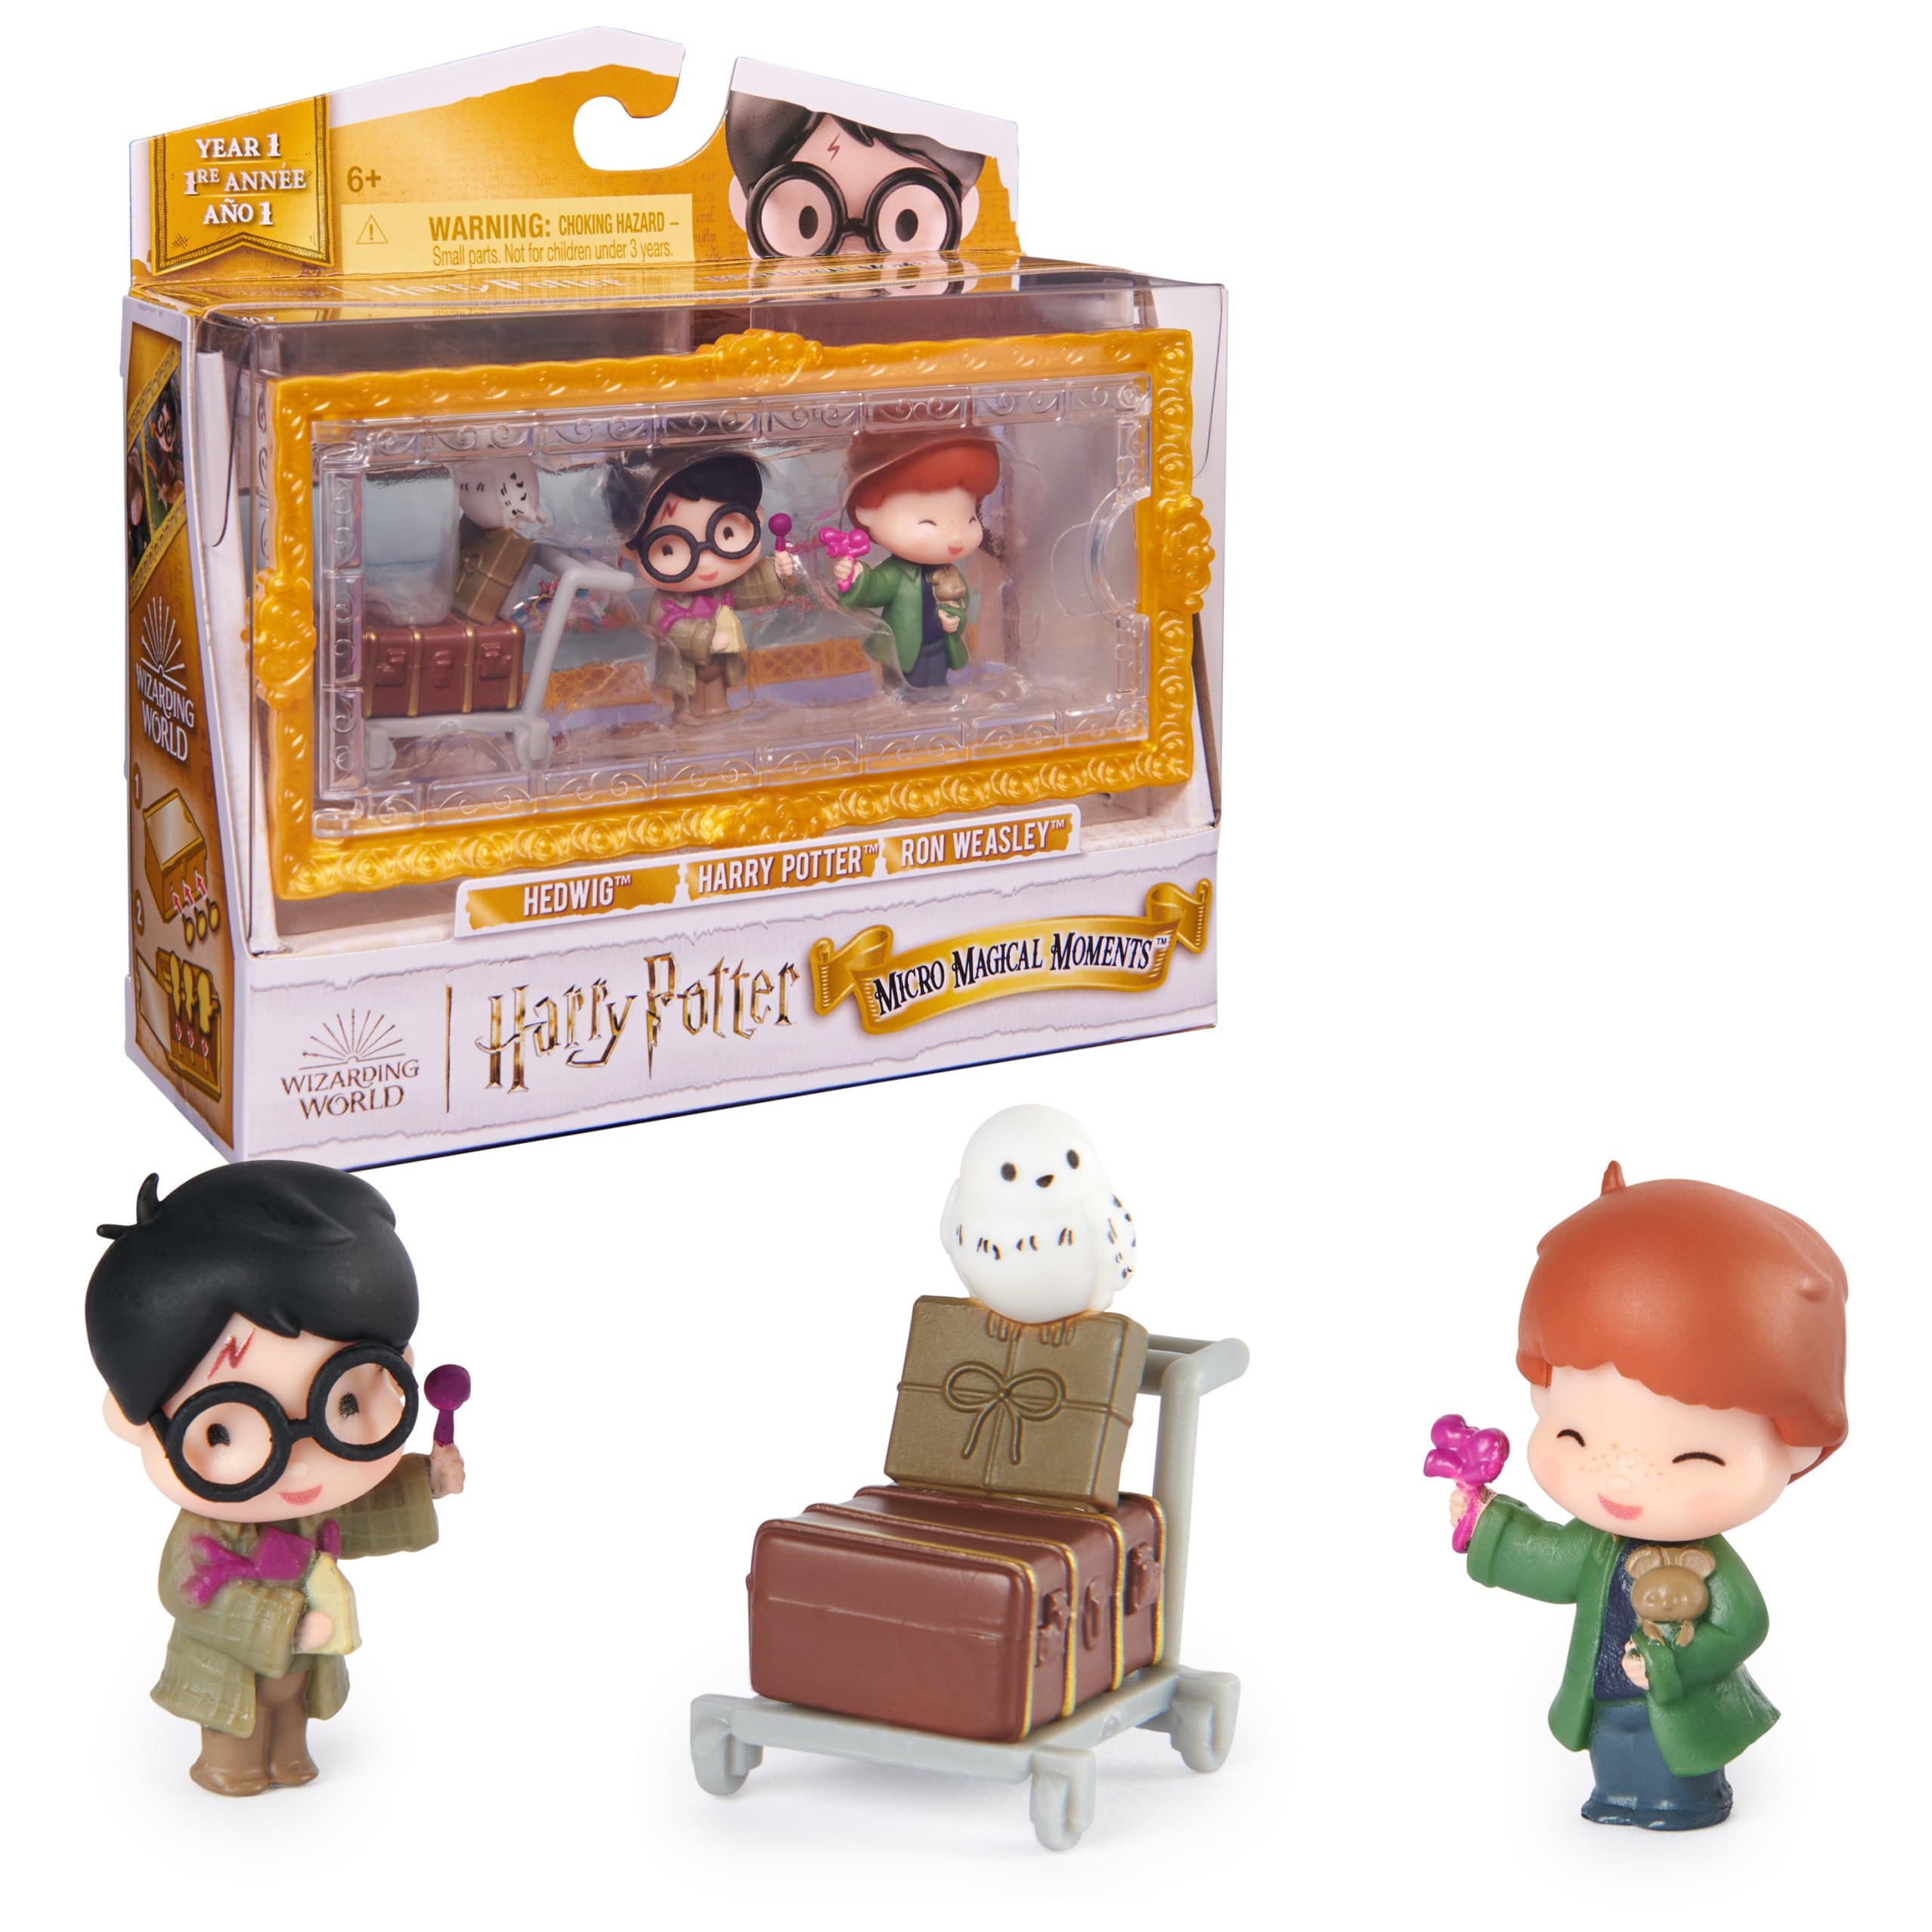 3-Pack 1.5" Wizarding World Harry Potter Micro Magical Moments Exclusive Harry, Ron, Hedwig Figures Set w/ Accessories and Display Case $3.90 + Free Shipping w/ Prime or on $35+